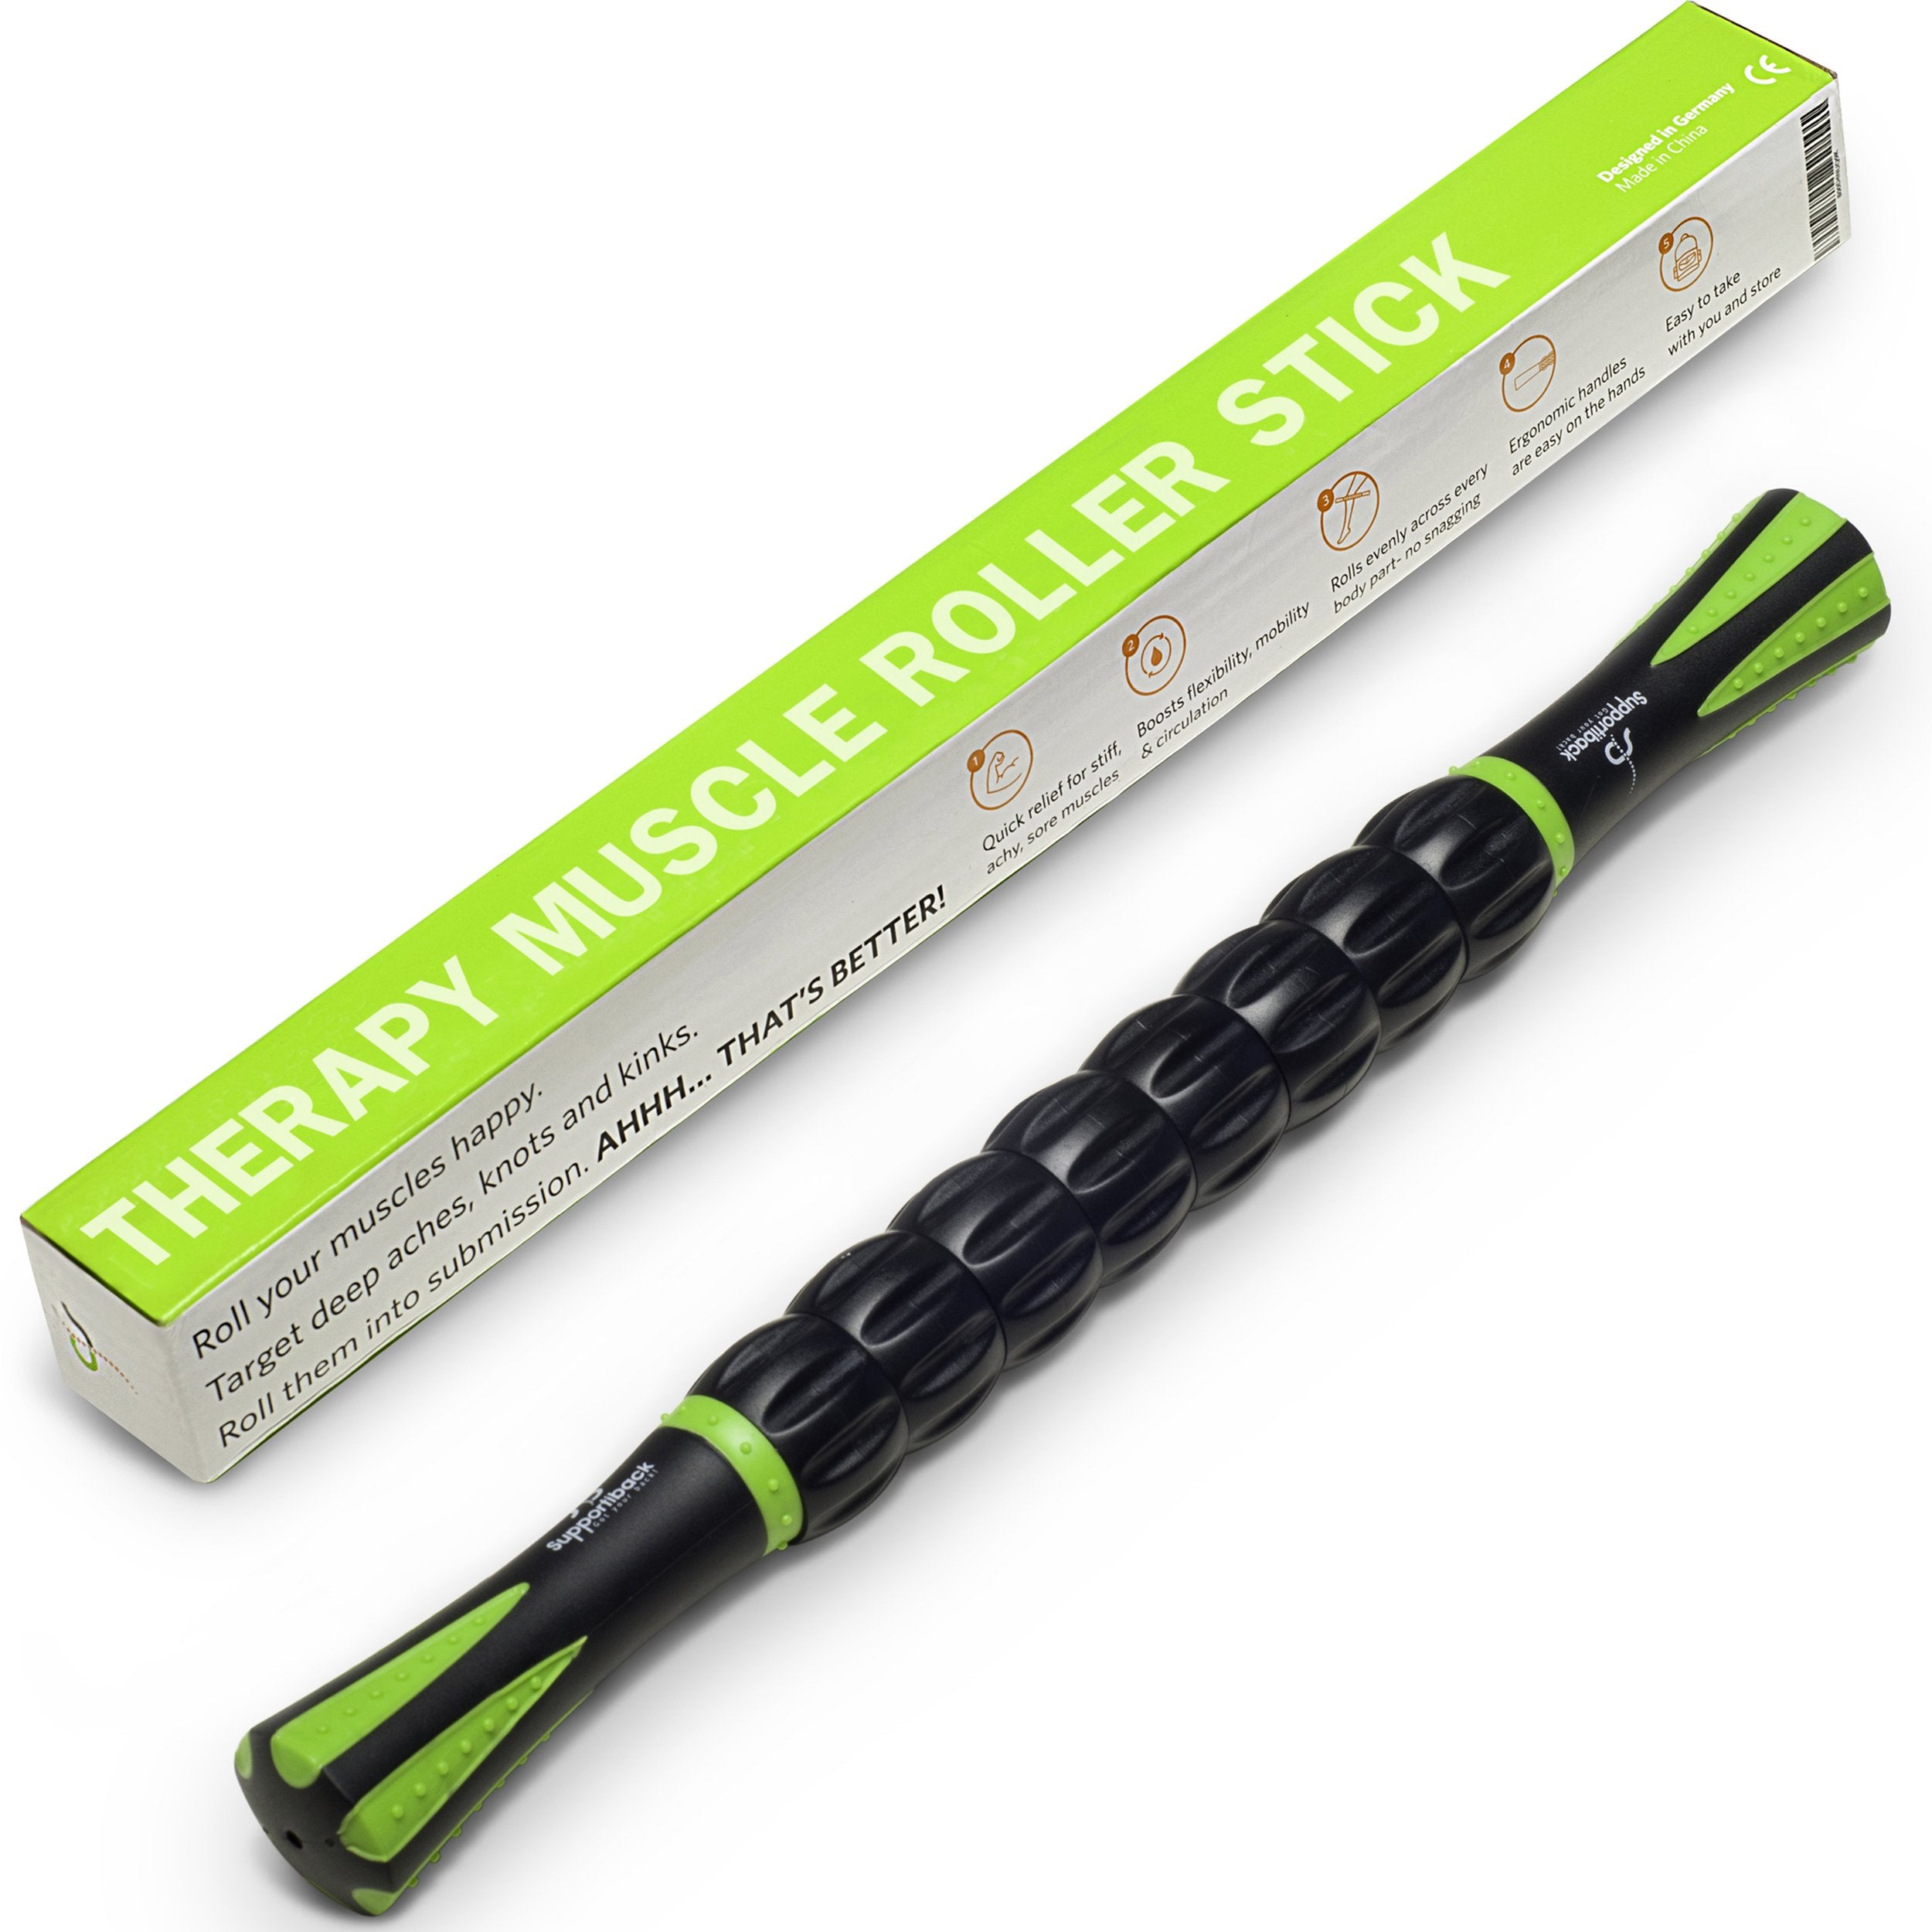 Supportiback 𝗧𝗘𝗡𝗦𝗜𝗢𝗡-𝗥𝗘𝗗𝗨𝗖𝗜𝗡𝗚 Muscle Therapy Massage Stick - 360° Coverage - Ridged Gears for Deep Release - BIO-Based & Carbon-STRENGTHENED - Physiotherapist Designed